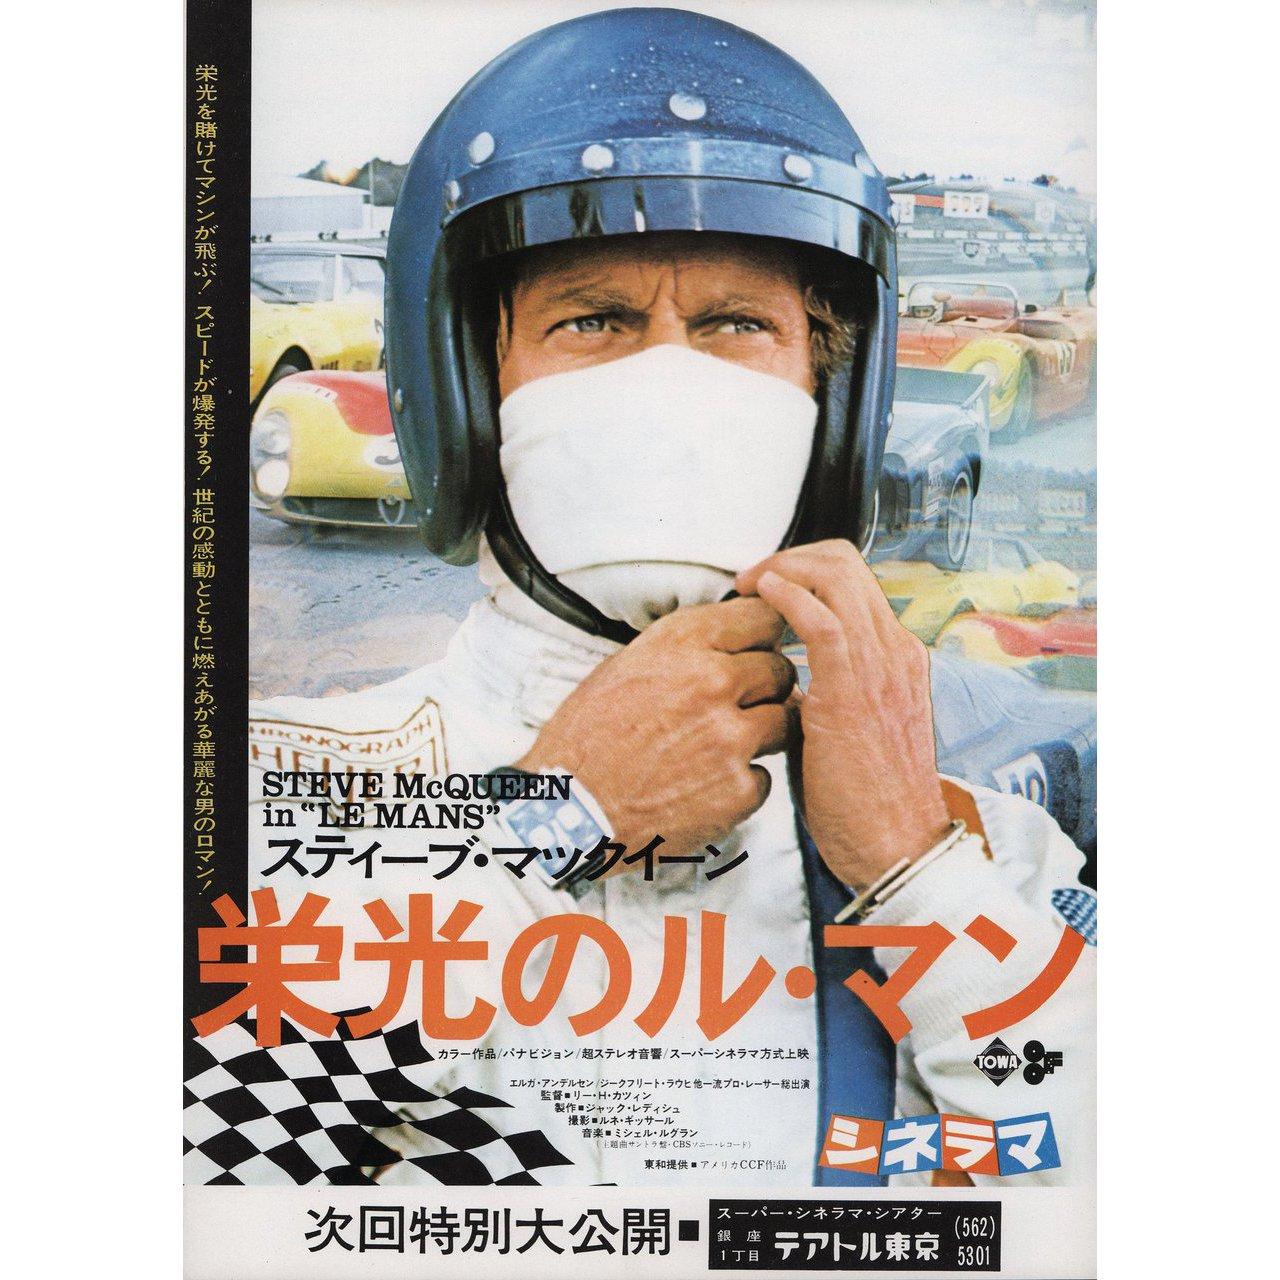 Original 1971 Japanese B5 chirashi flyer for the film Le Mans directed by Lee H. Katzin with Steve McQueen / Siegfried Rauch / Elga Andersen / Ronald Leigh-Hunt. Fine condition, rolled. Please note: the size is stated in inches and the actual size